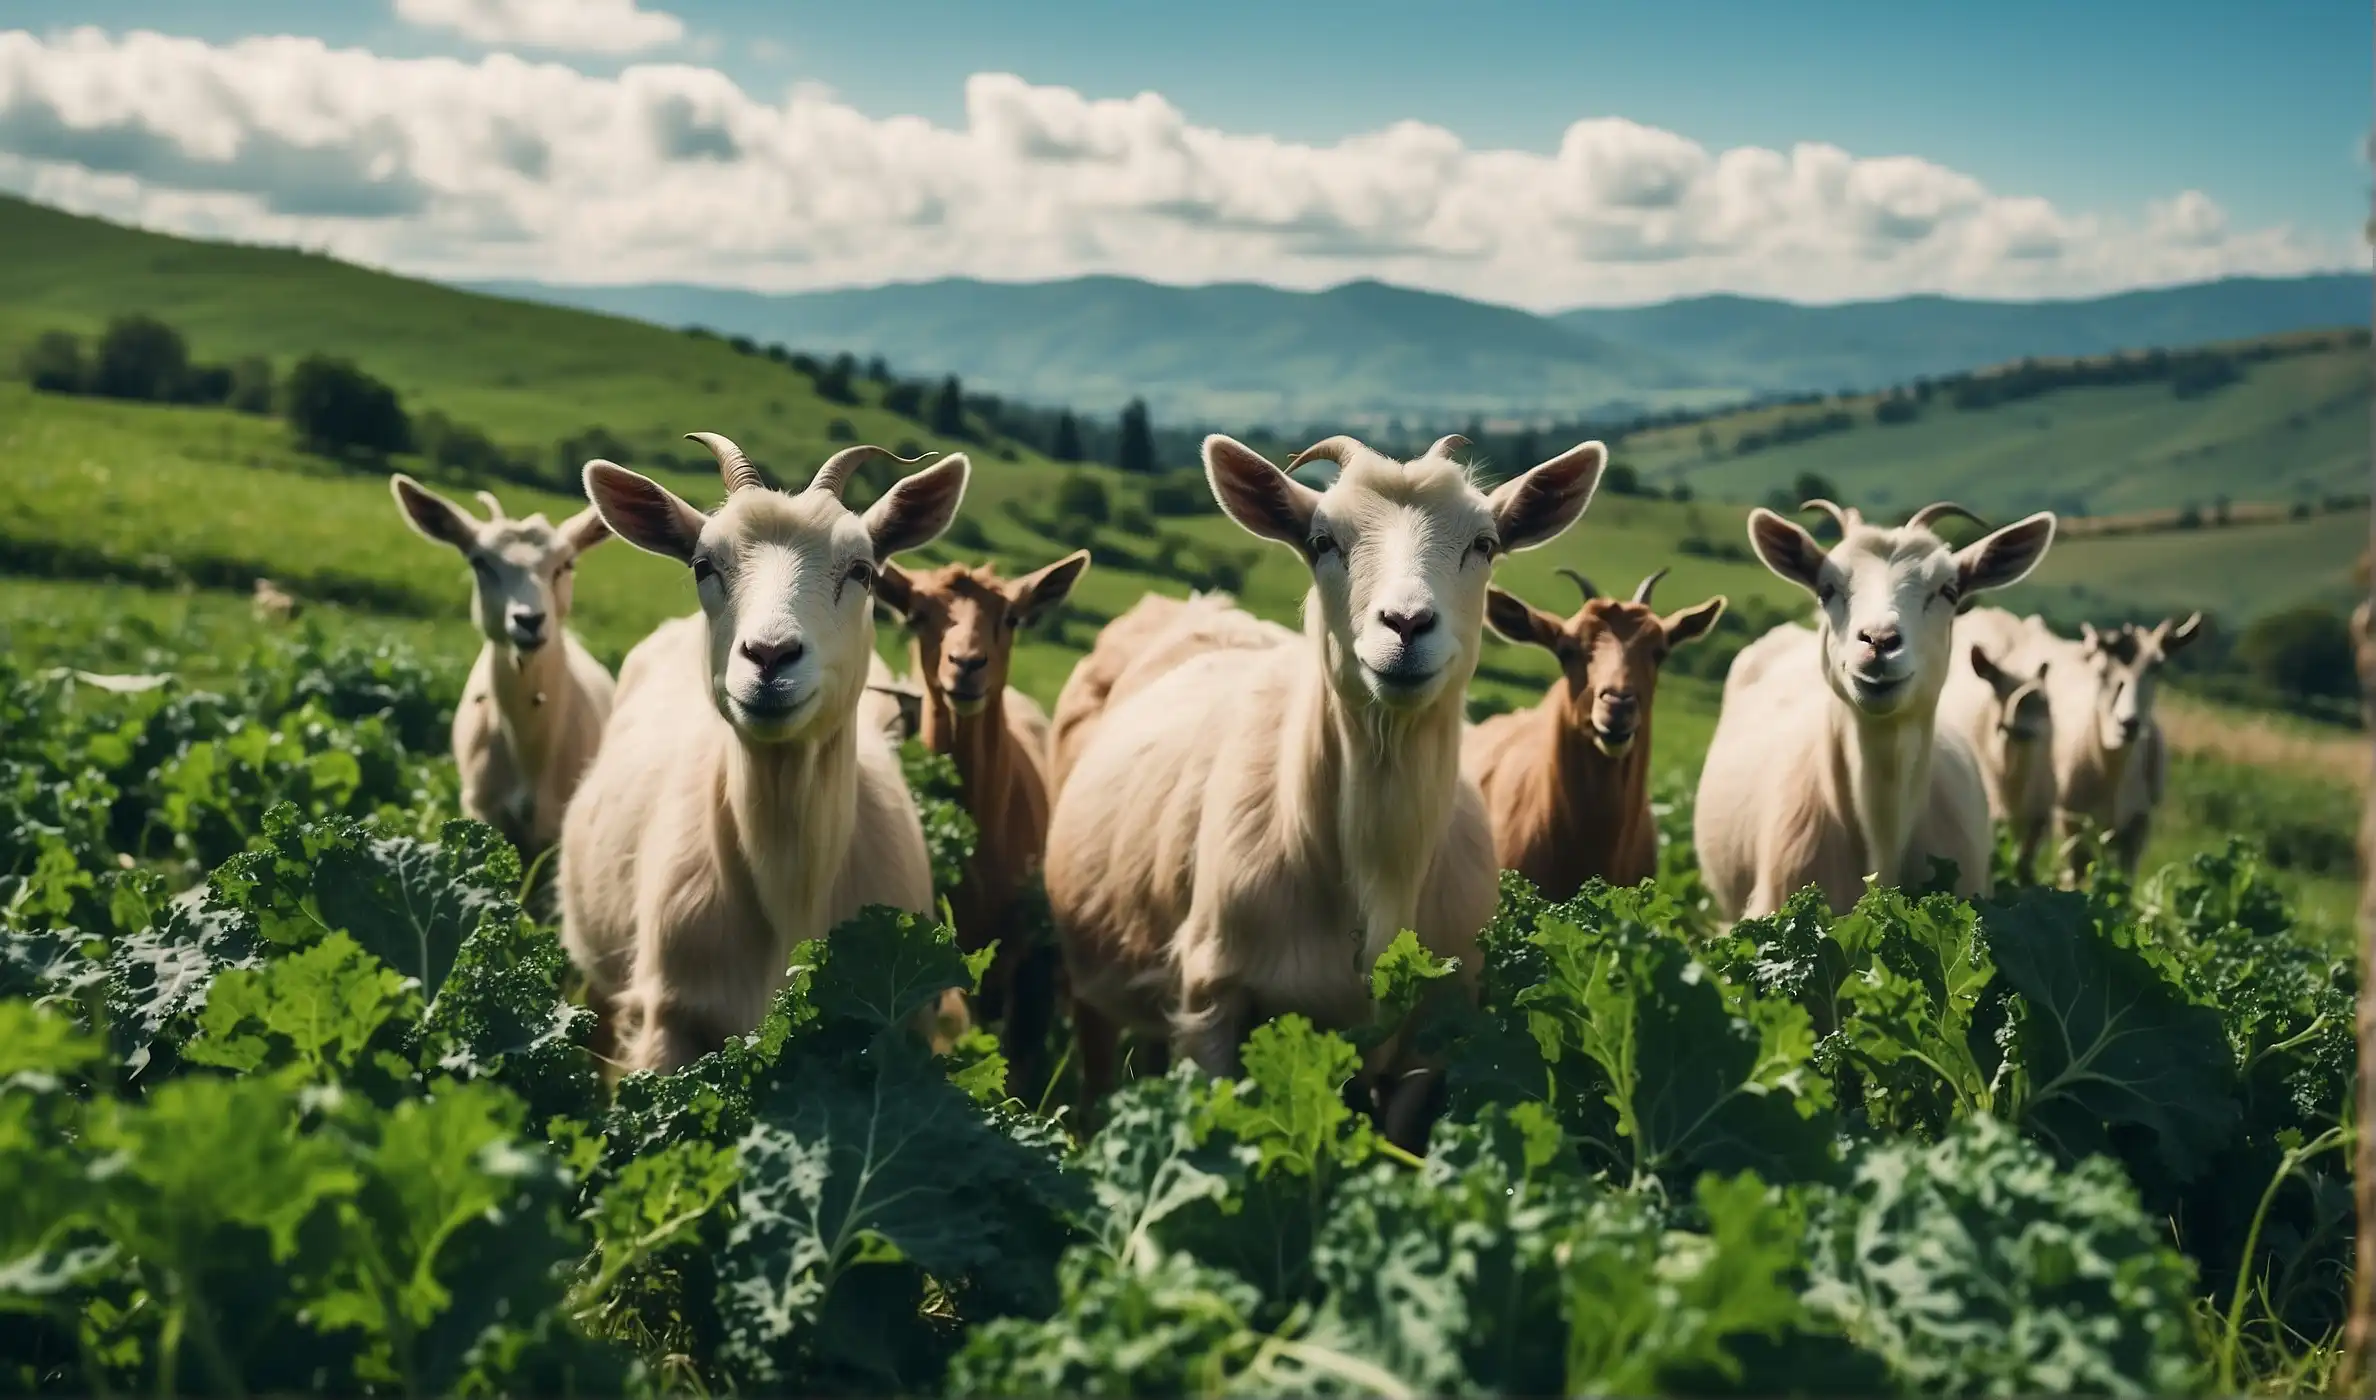 A group of goats grazing in a lush kale field